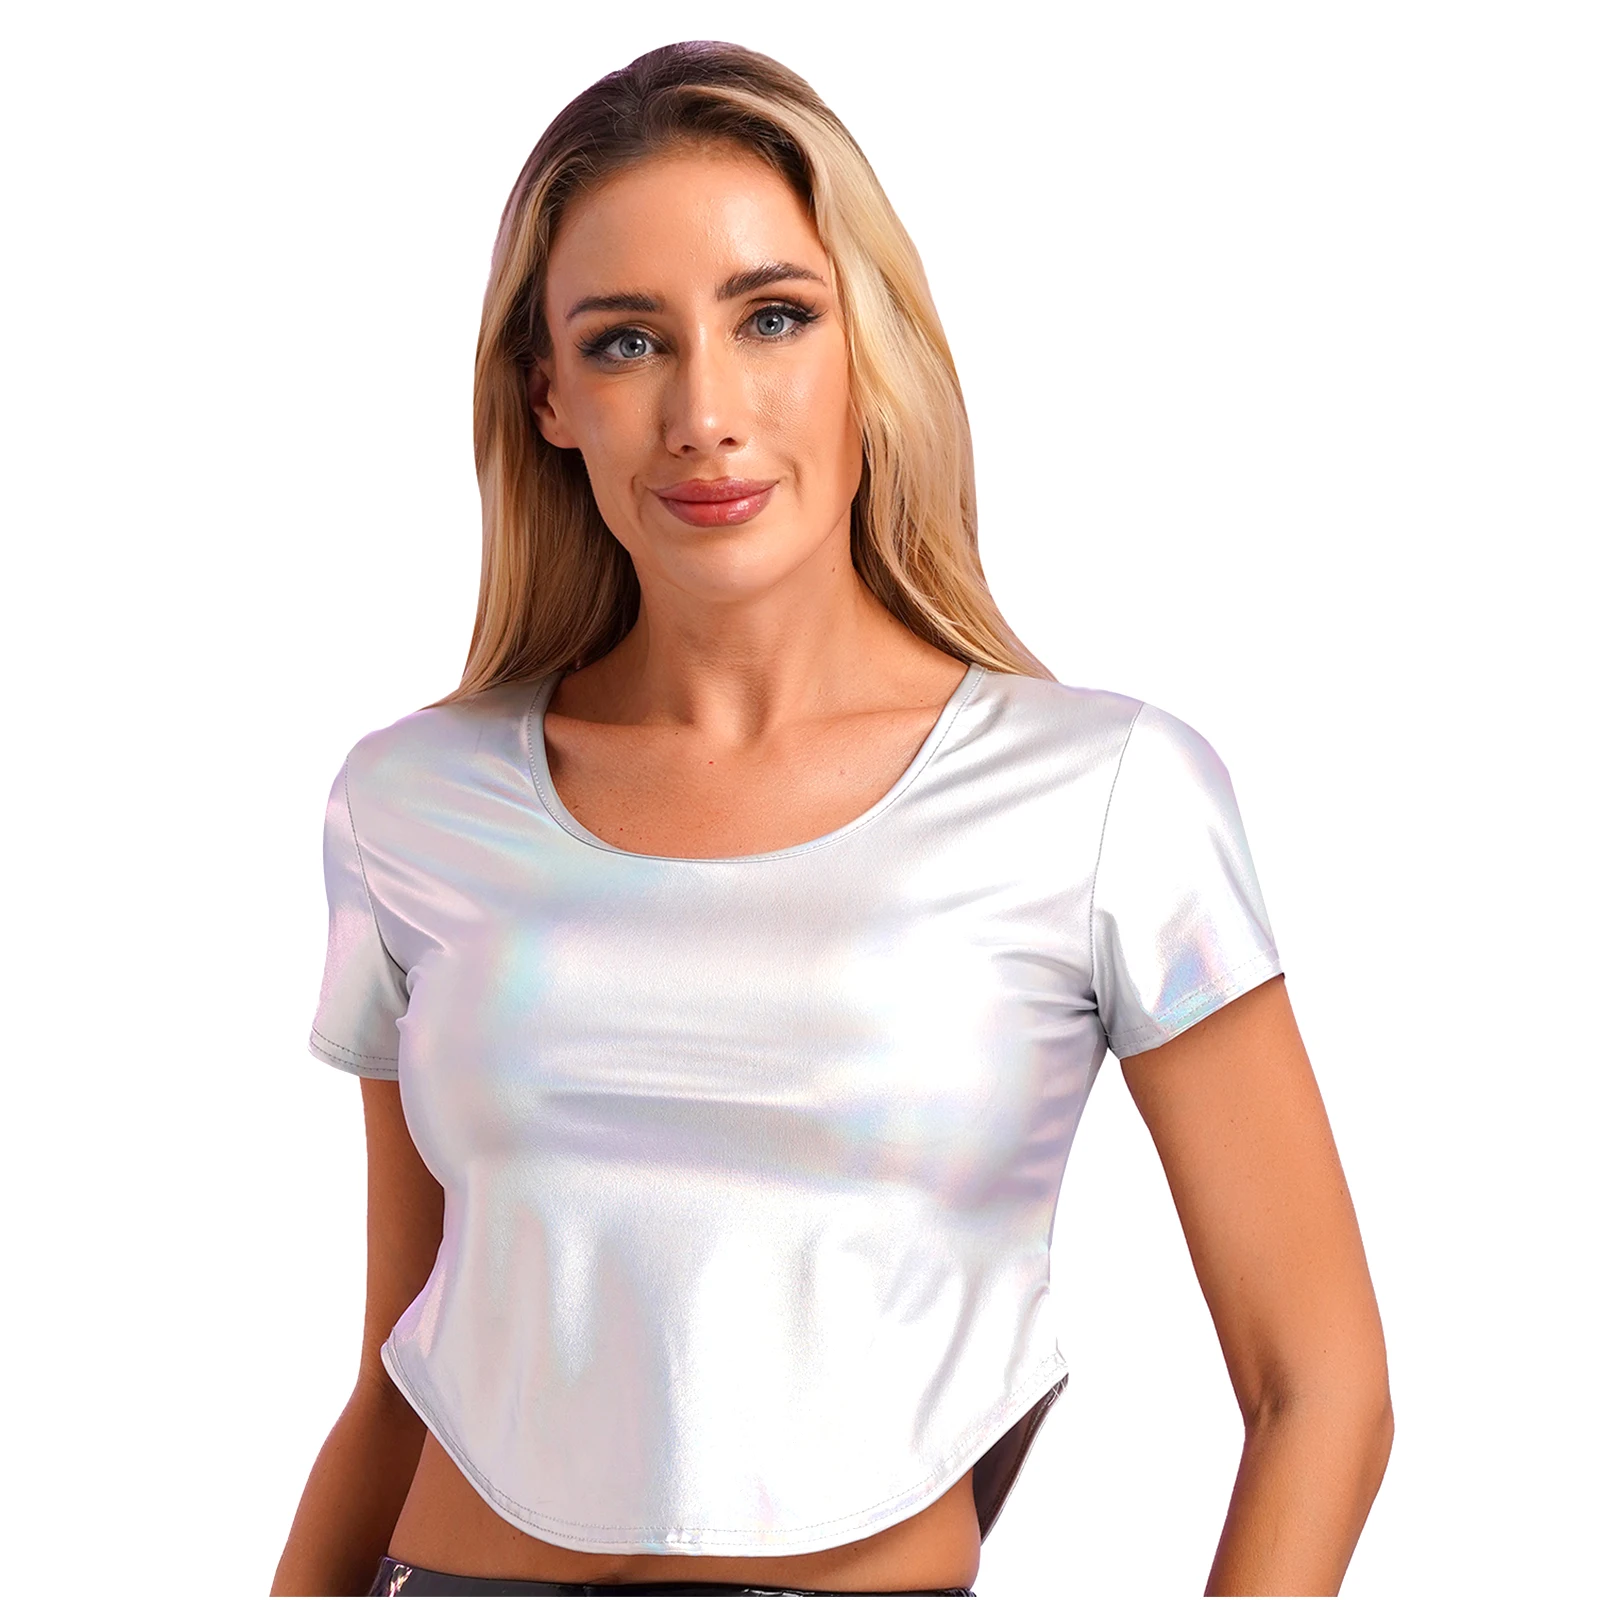 

Womens Metallic Curved Hem Crop Top Round Neck Short Sleeve T-shirt Rave Party Music Festival Stage Performance Costume